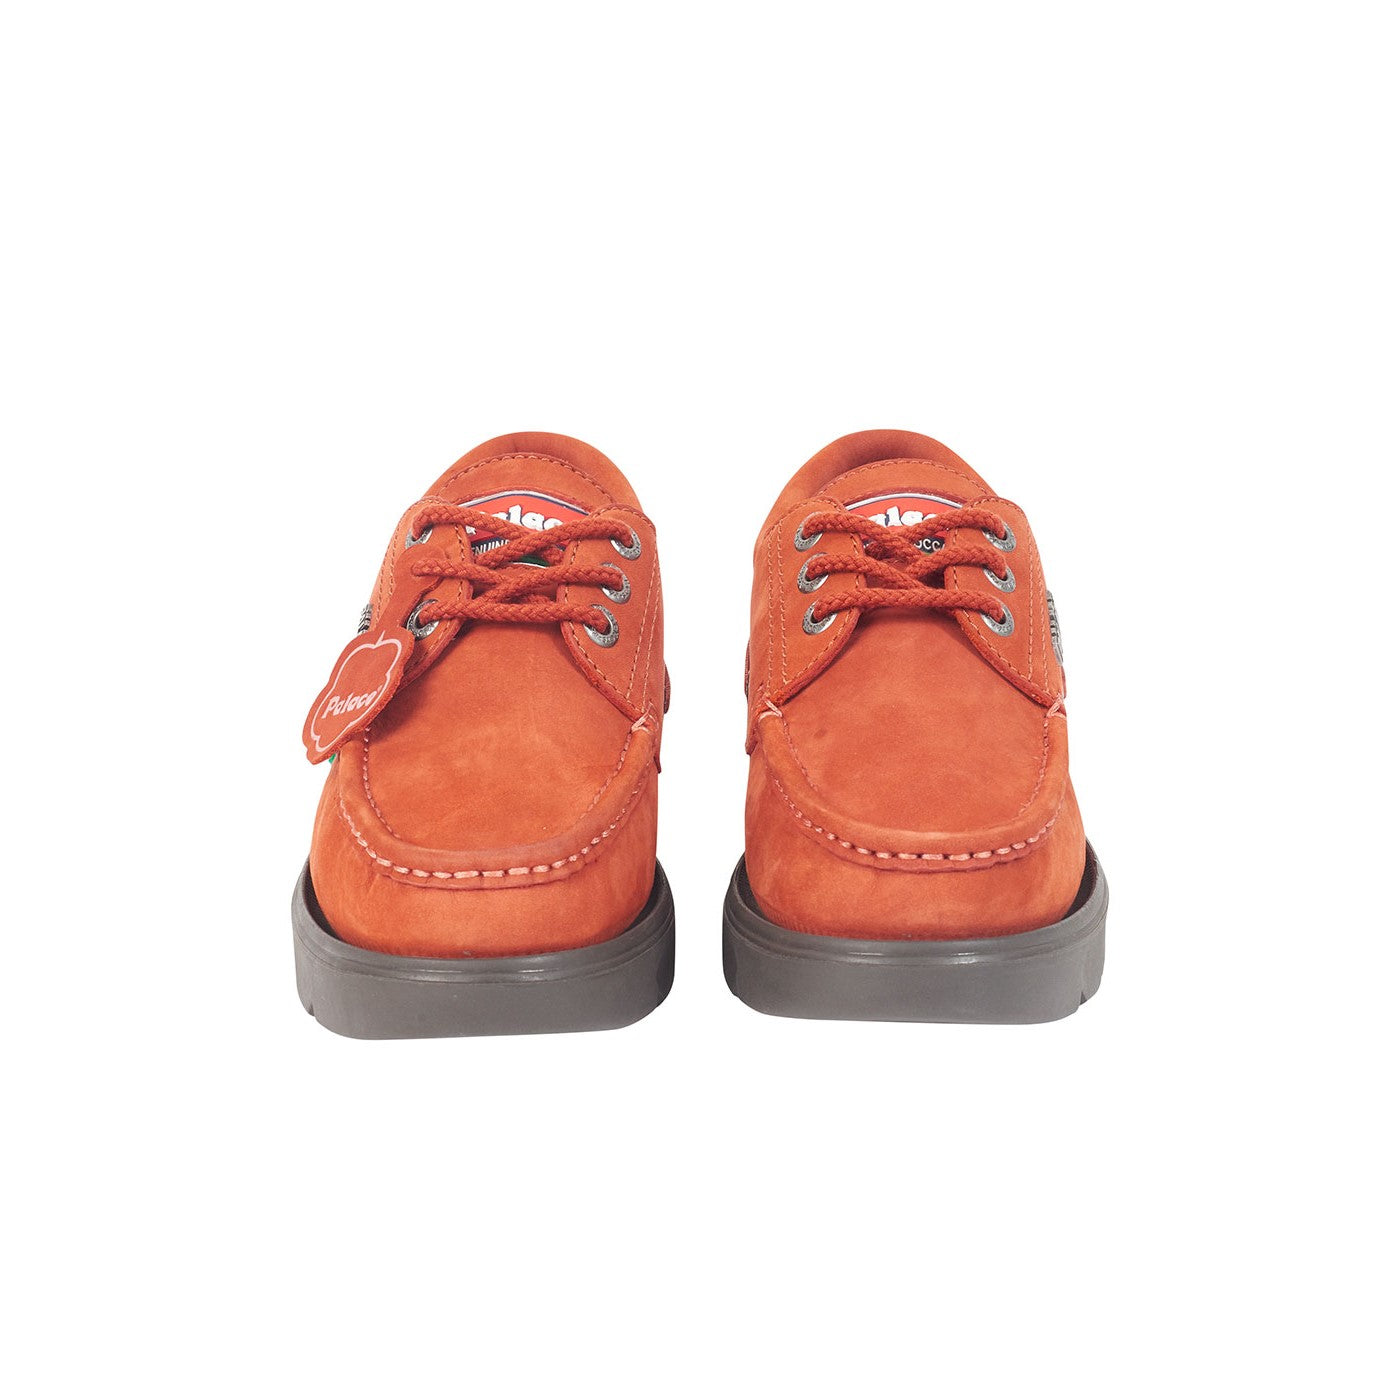 Palace Kickers Moccasin Rust